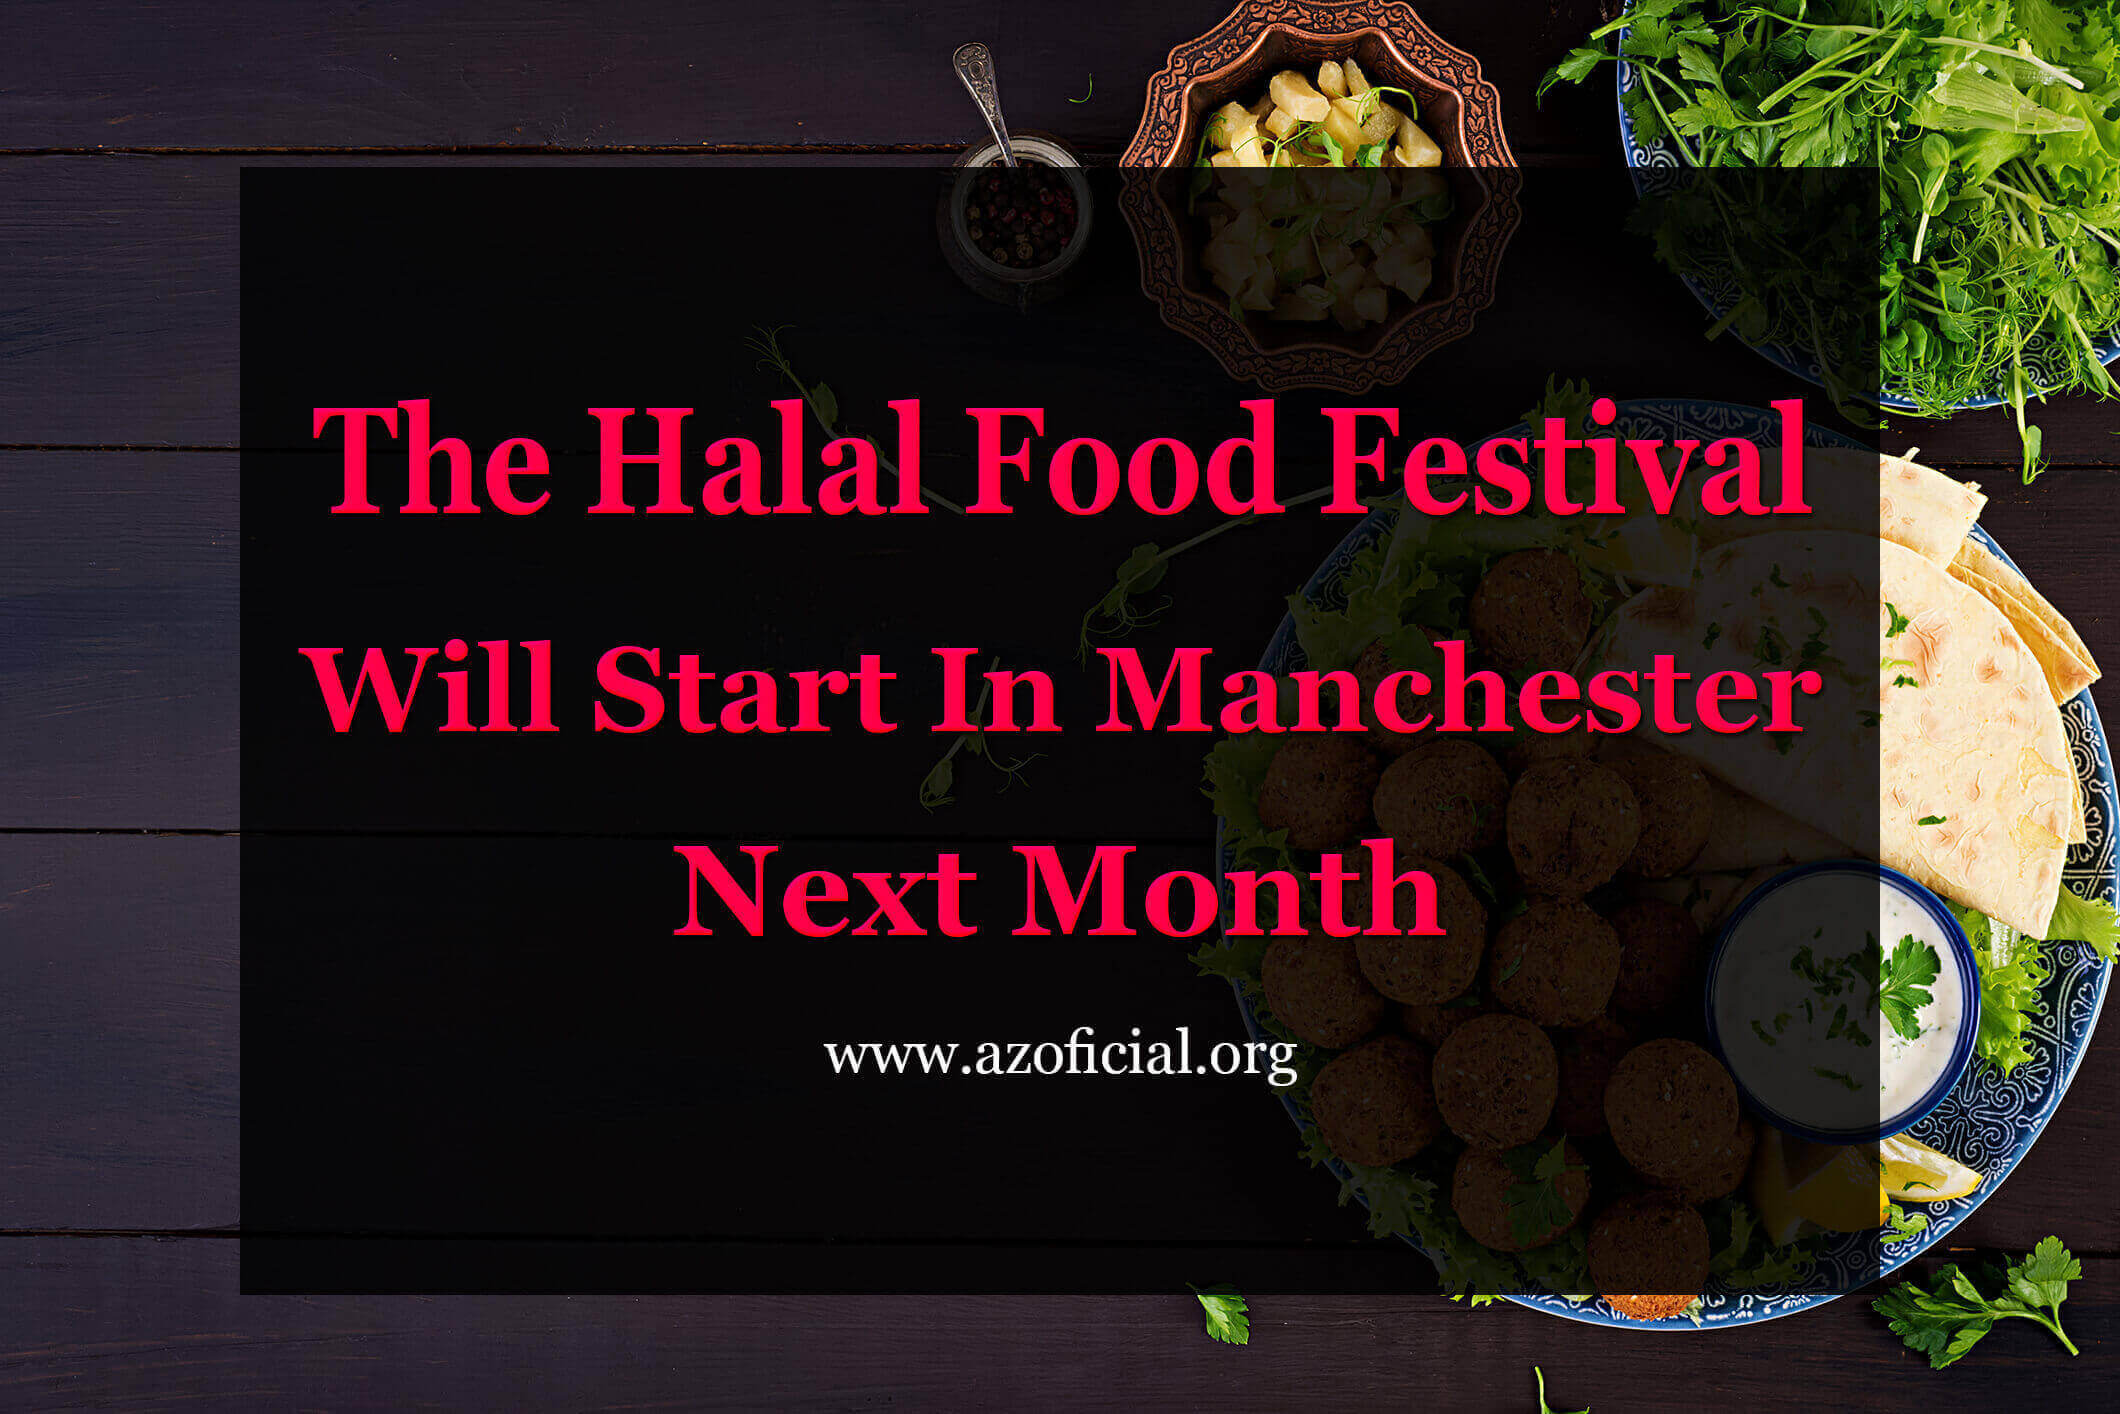 The Halal Food Festival Will Start In Manchester Next Month